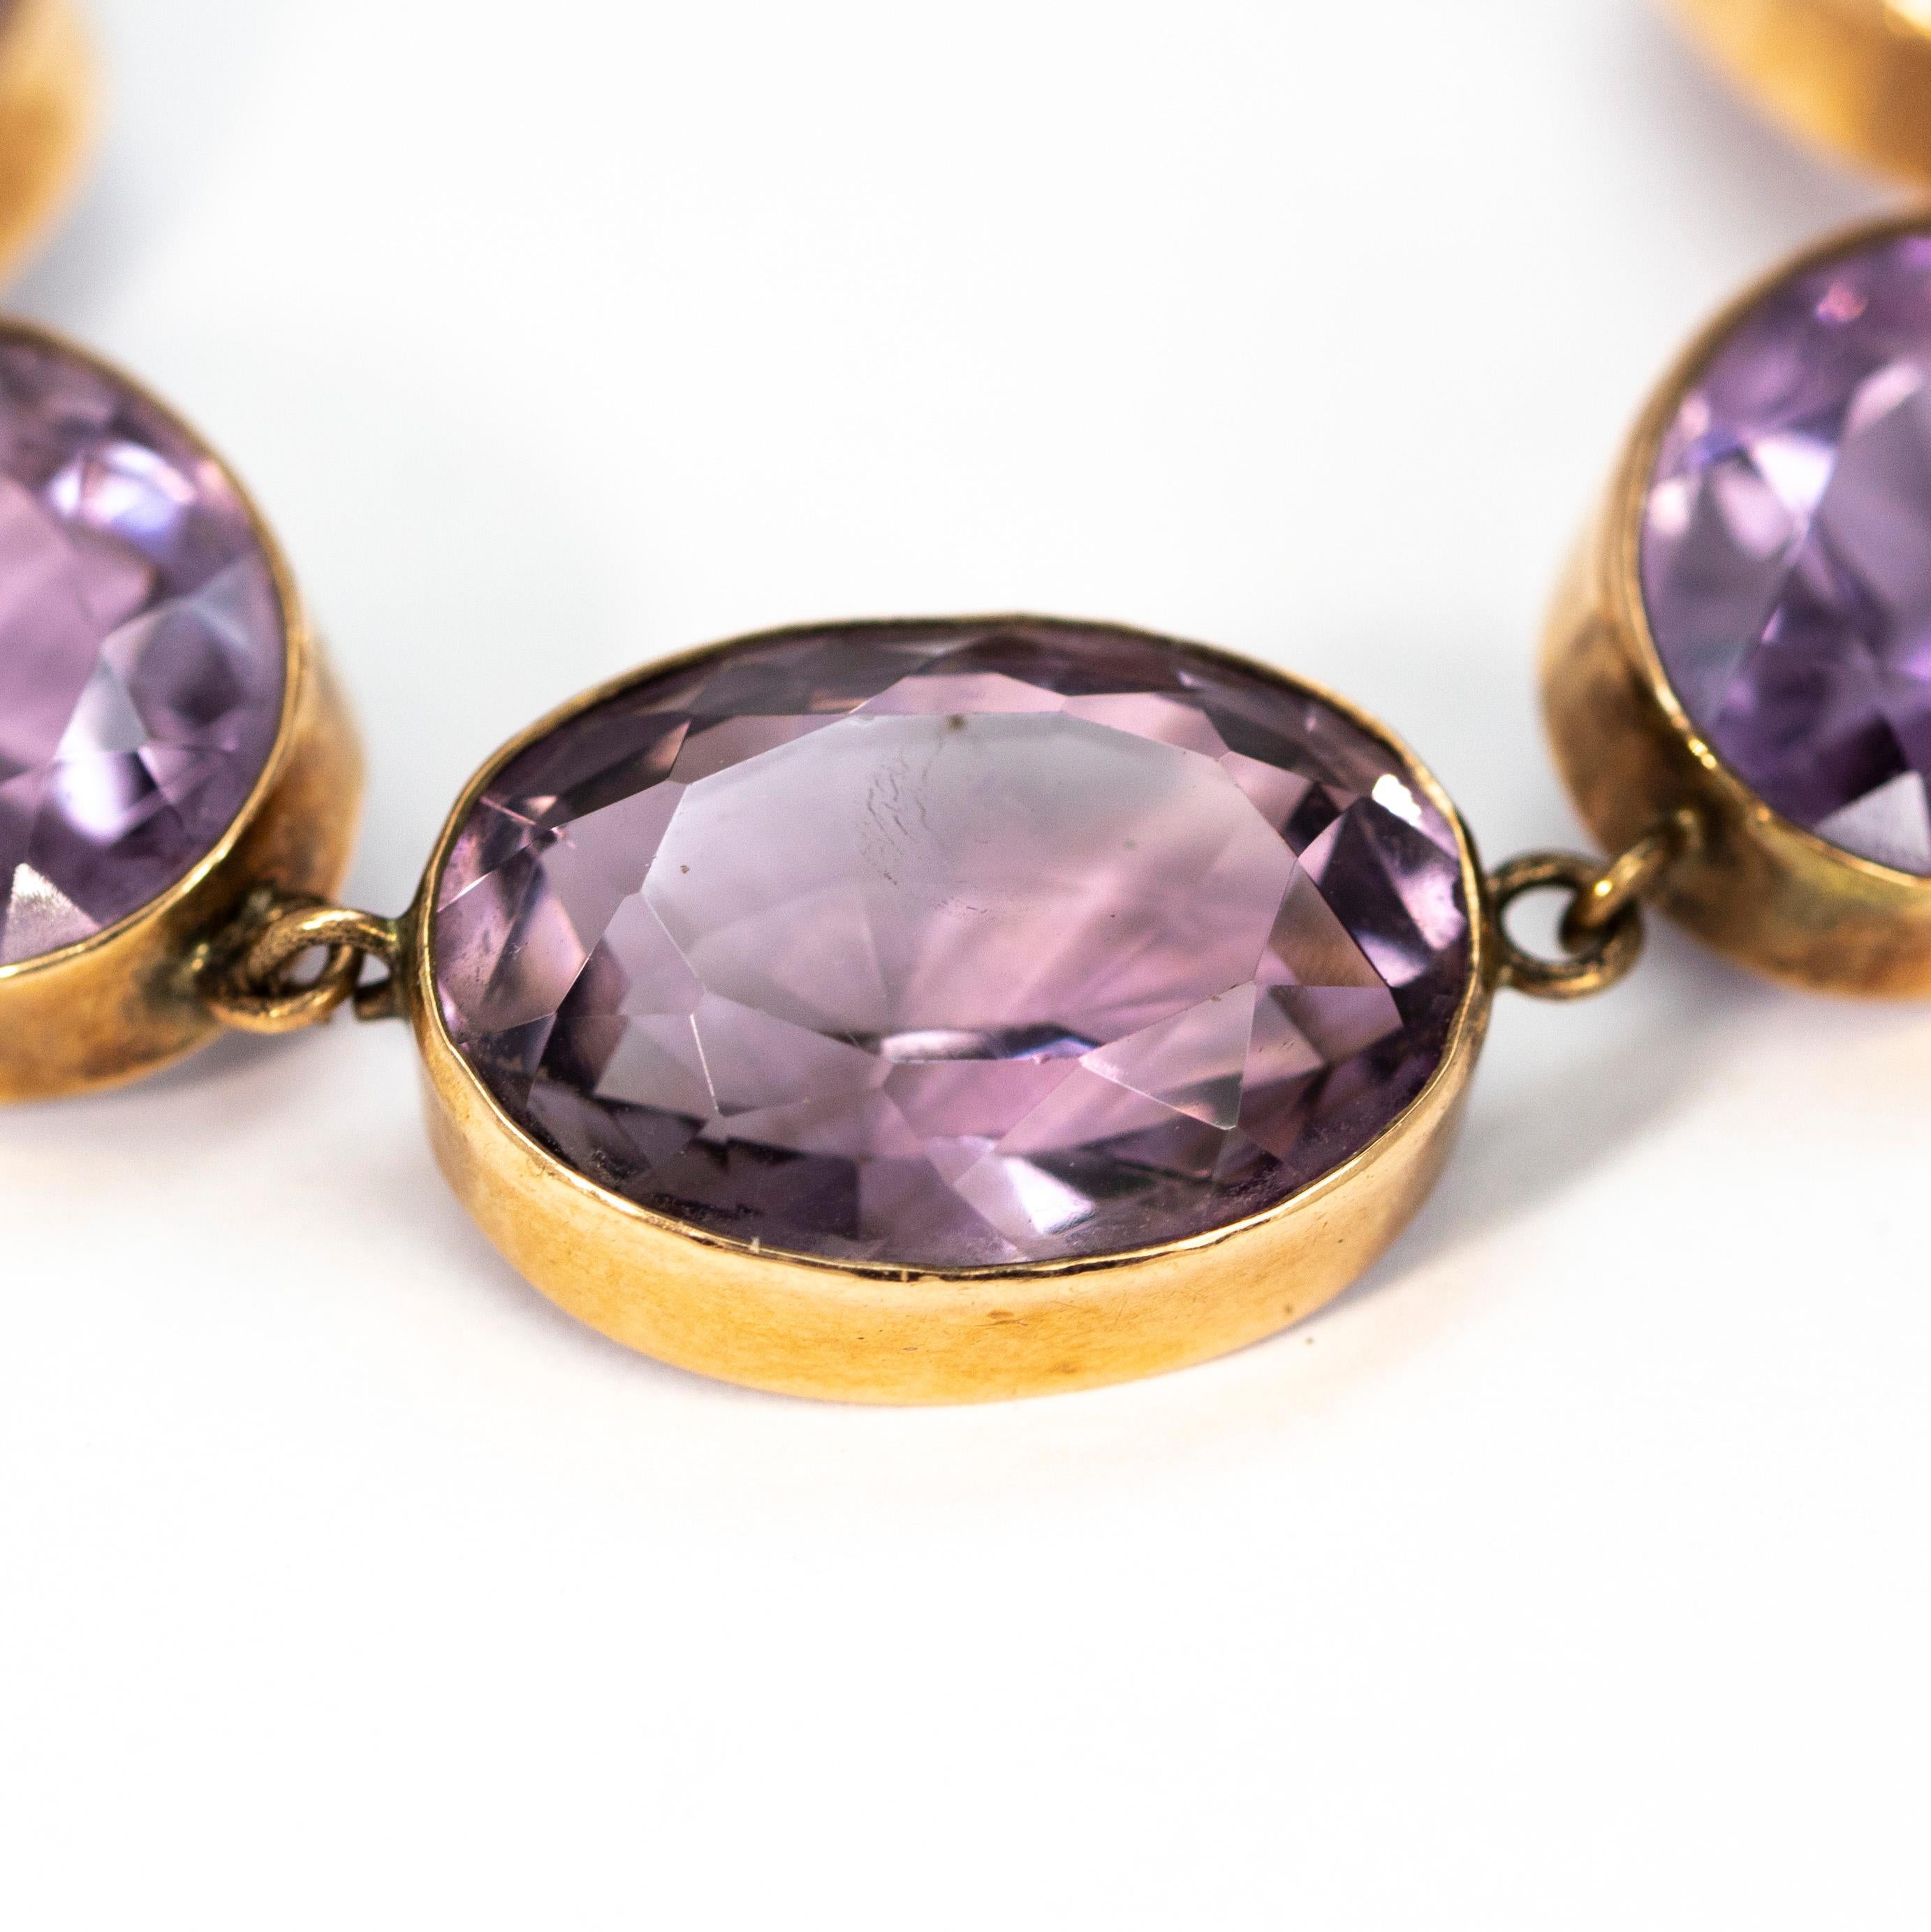 The amethyst stone are a pale purple colour which sit beautifully with the yellow gold simple settings. The stones slightly graduate in size from the centre of the necklace to the fastening. 

Length: 15 1/2 inches 
Stone Dimensions From 15 x 20mm